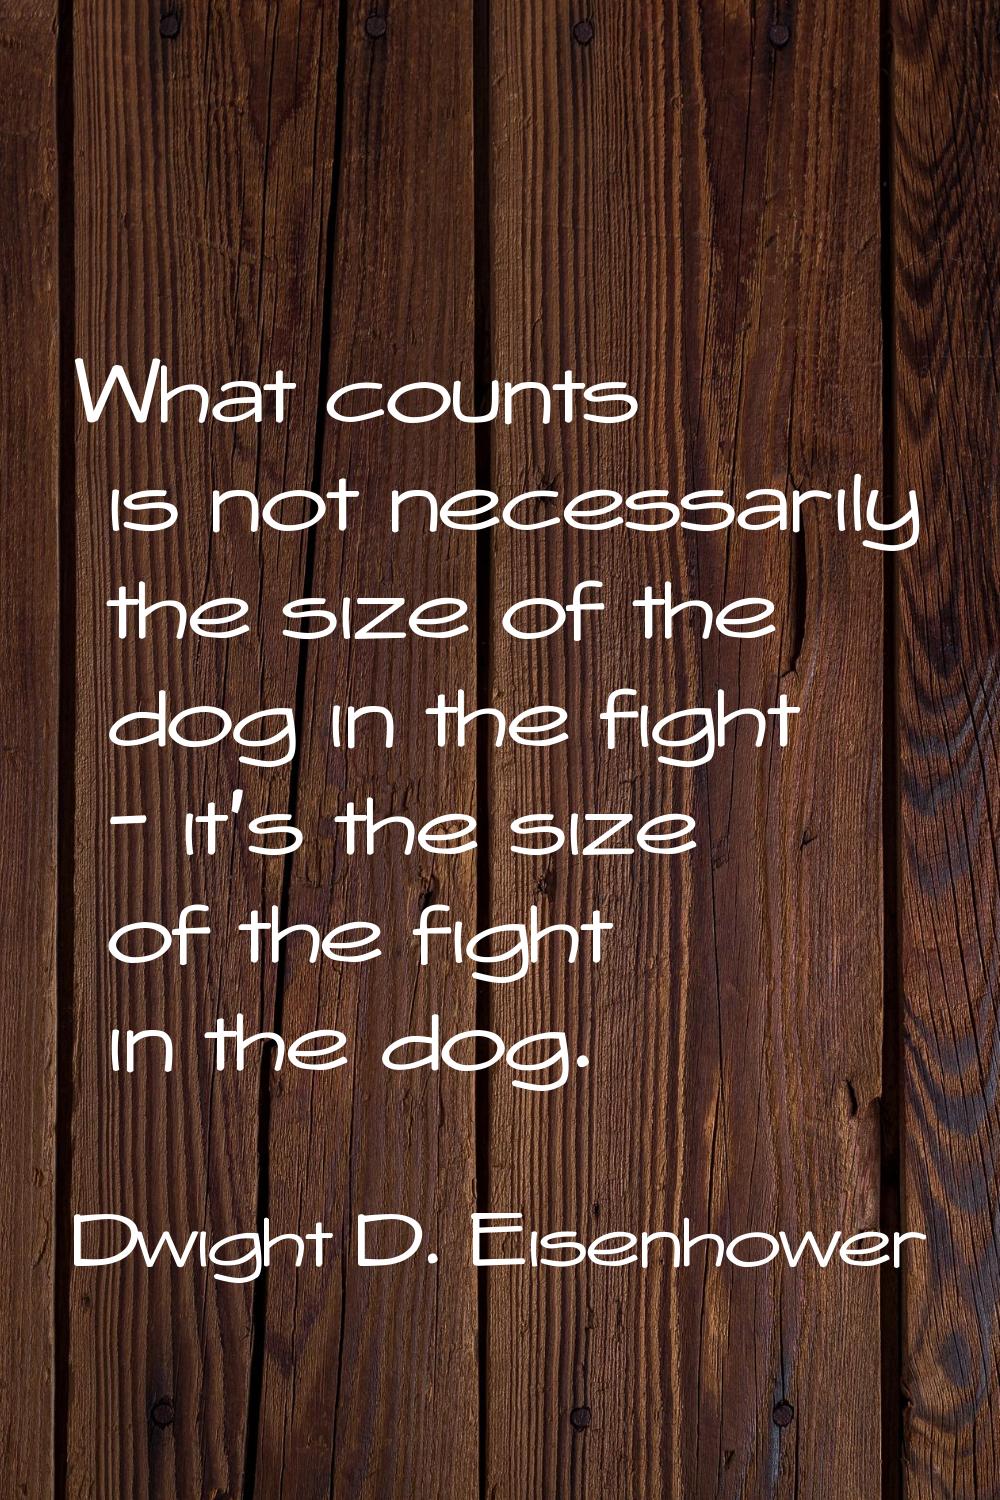 What counts is not necessarily the size of the dog in the fight - it's the size of the fight in the